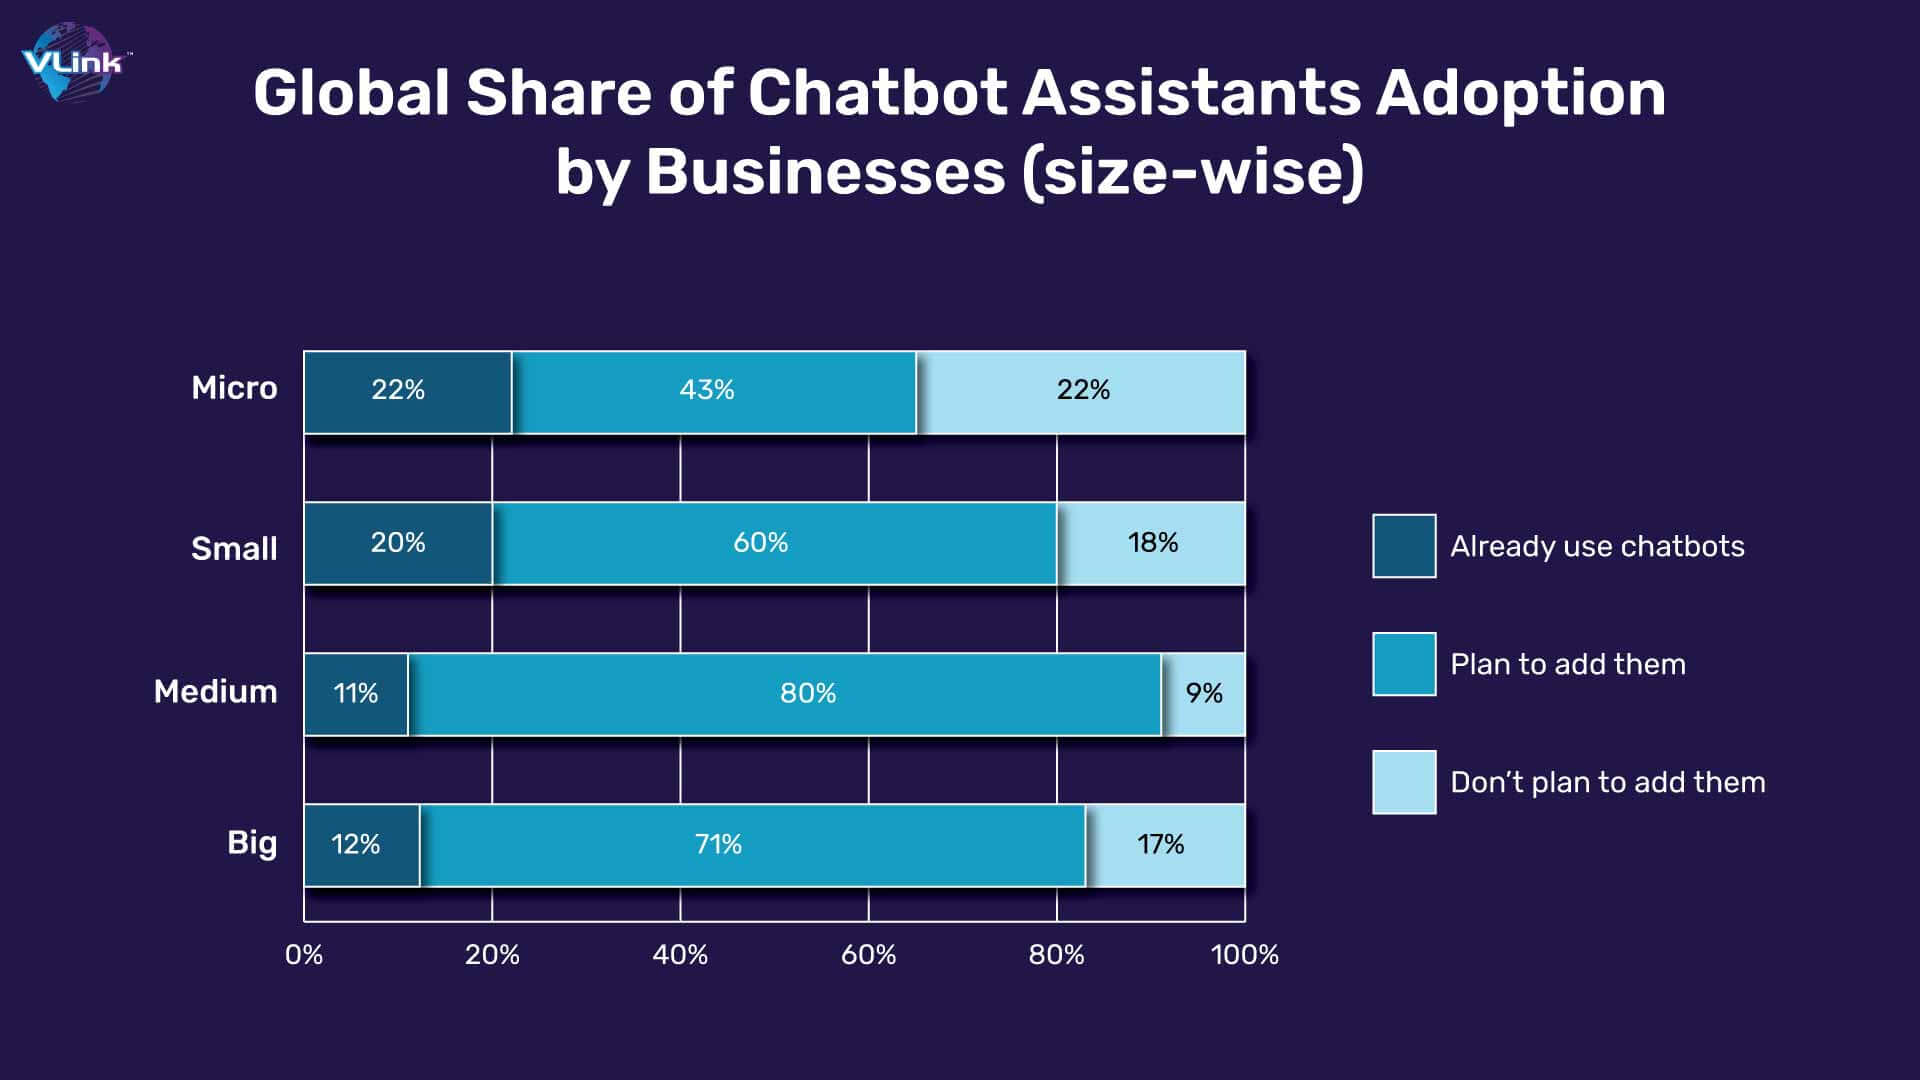 Global Share of Chatbot Assistants Adoption by Businesses (size-wise)